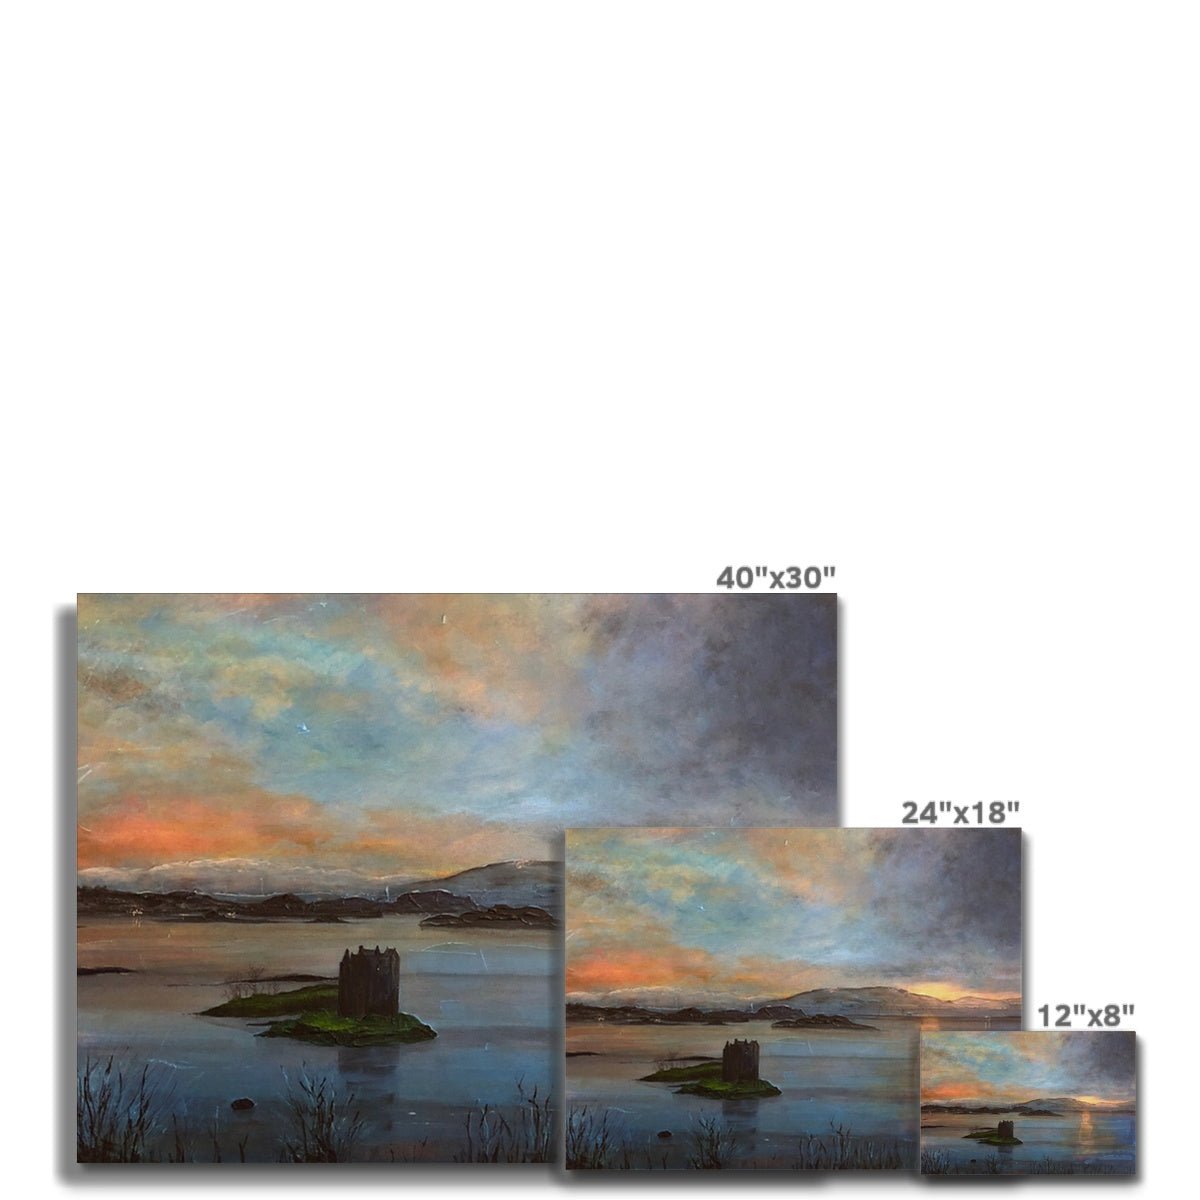 Castle Stalker Twilight Painting | Canvas From Scotland-Contemporary Stretched Canvas Prints-Historic & Iconic Scotland Art Gallery-Paintings, Prints, Homeware, Art Gifts From Scotland By Scottish Artist Kevin Hunter